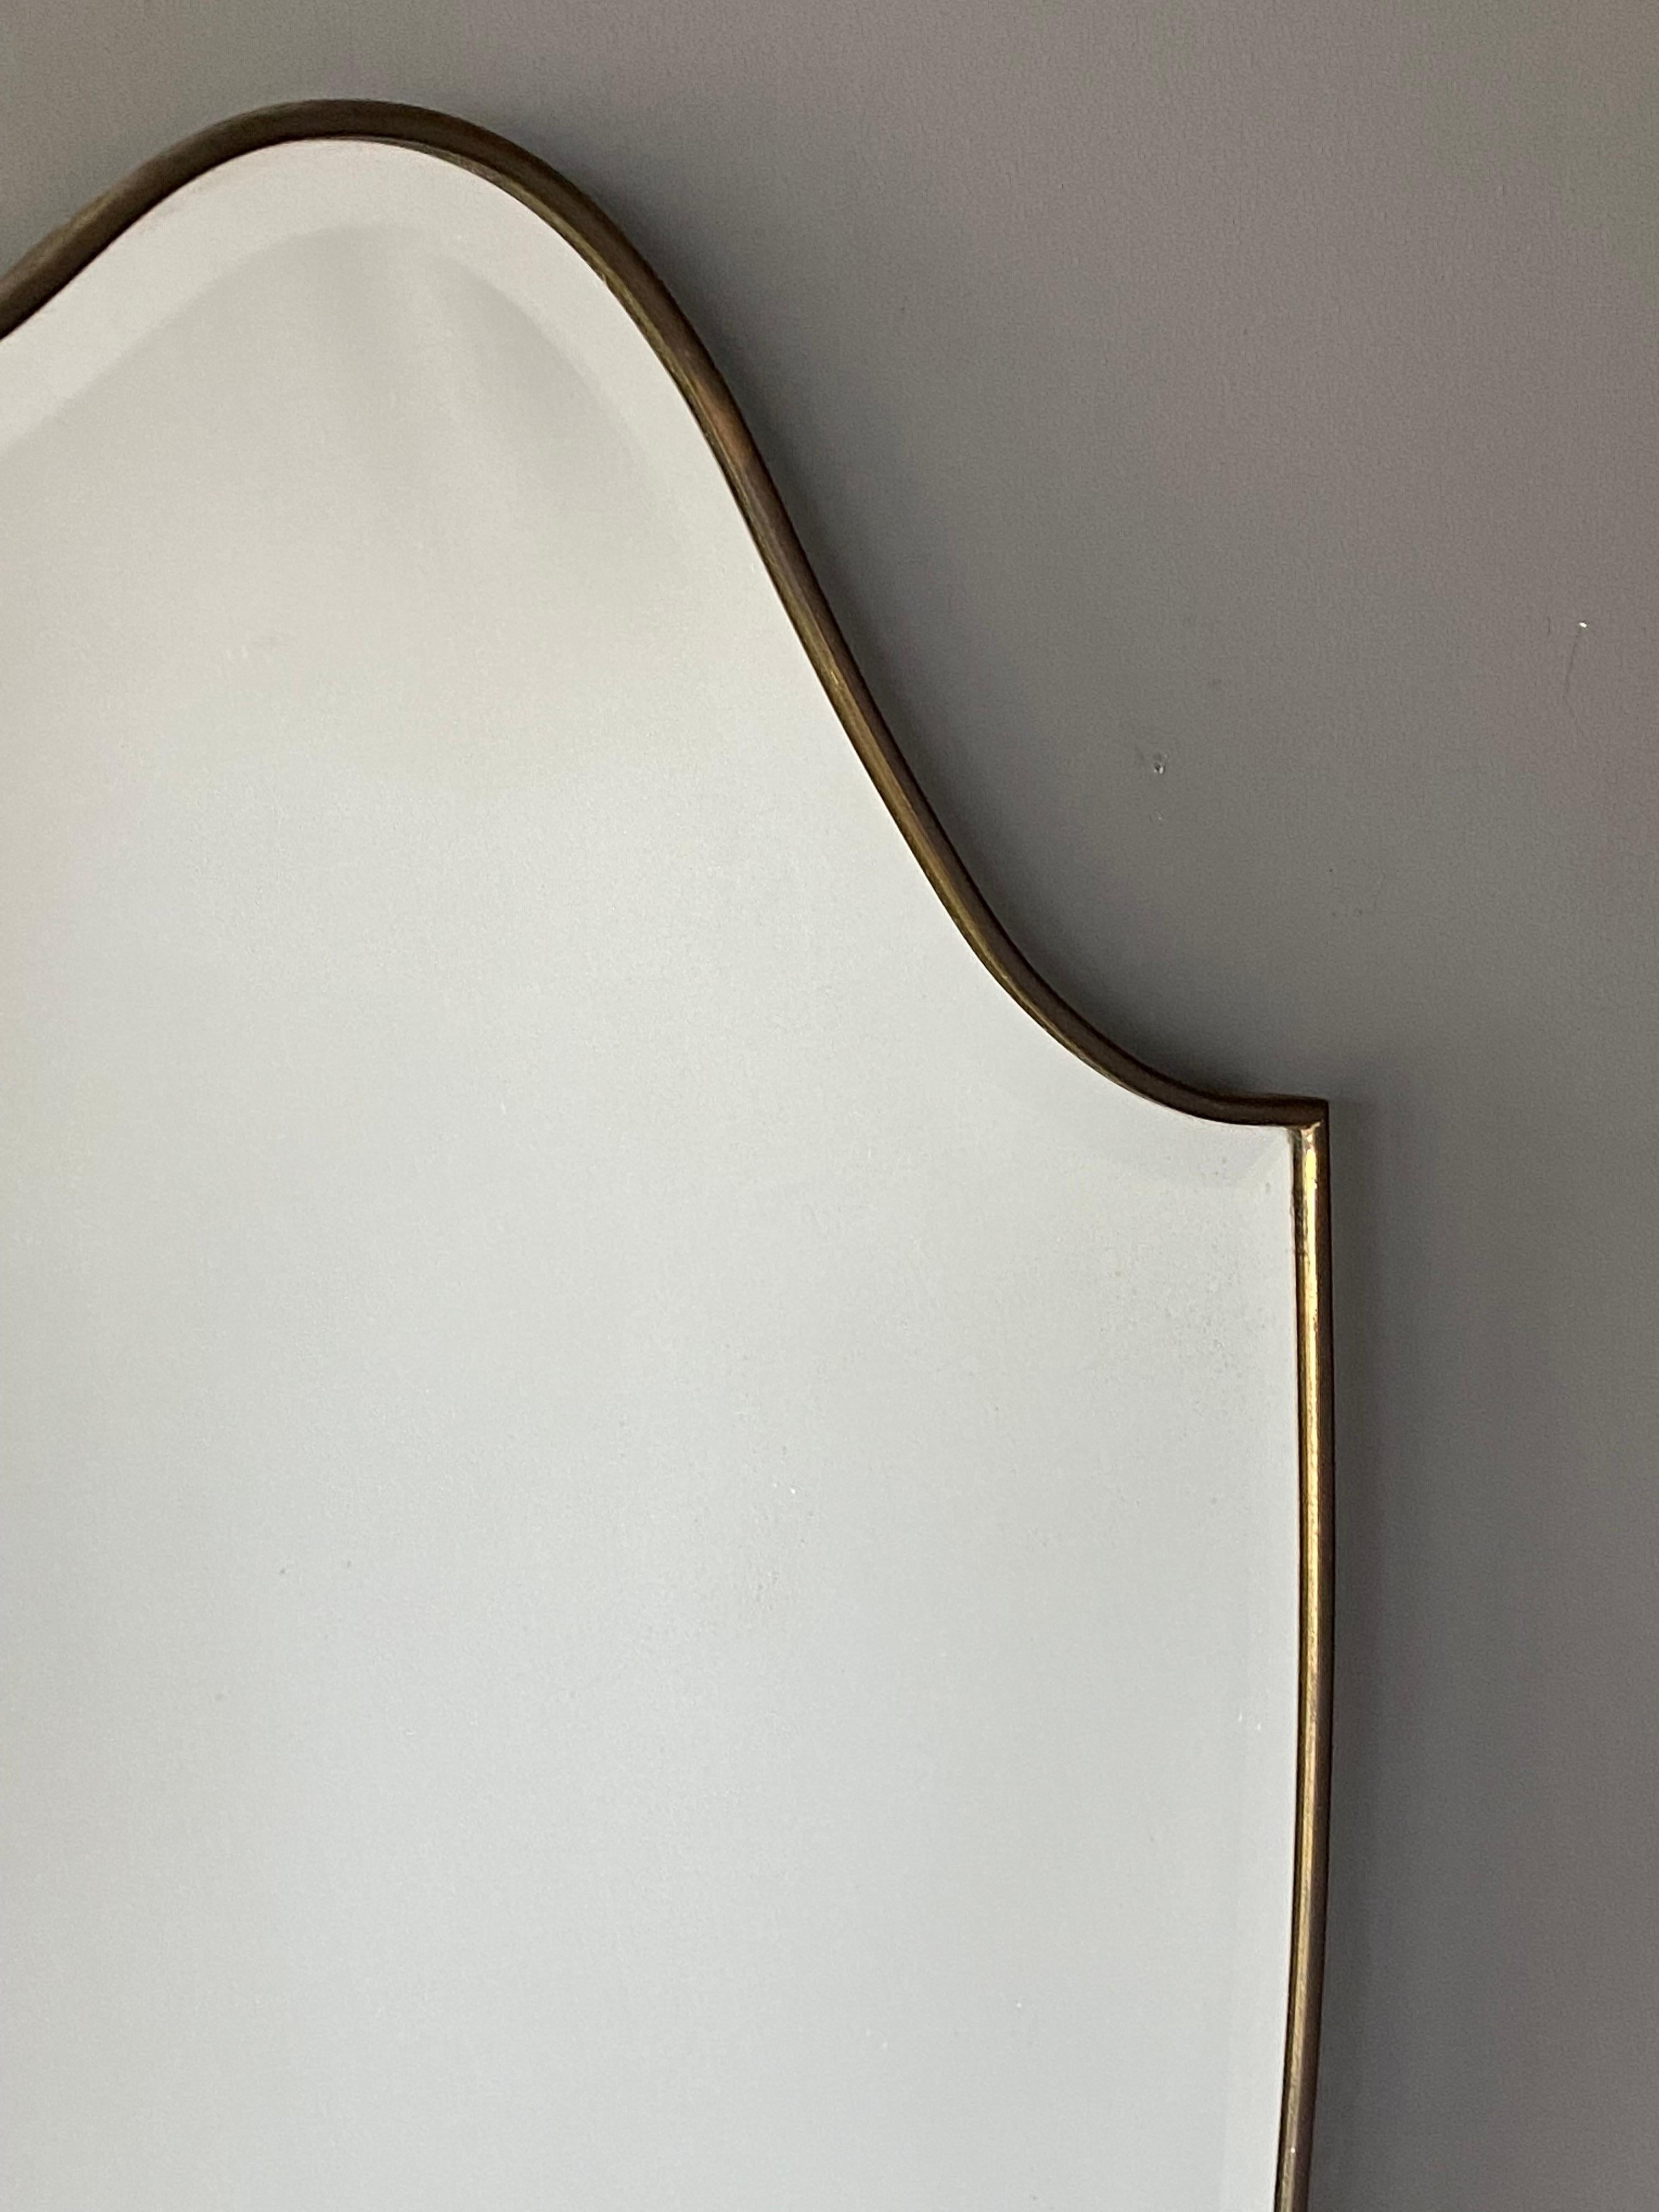 A large wall mirror, produced in Italy, 1940s-1950s. Cut mirror glass is framed in brass. 

Other designers of the period include Gio Ponti, Fontana Arte, Max Ingrand, Franco Albini, and Josef Frank.